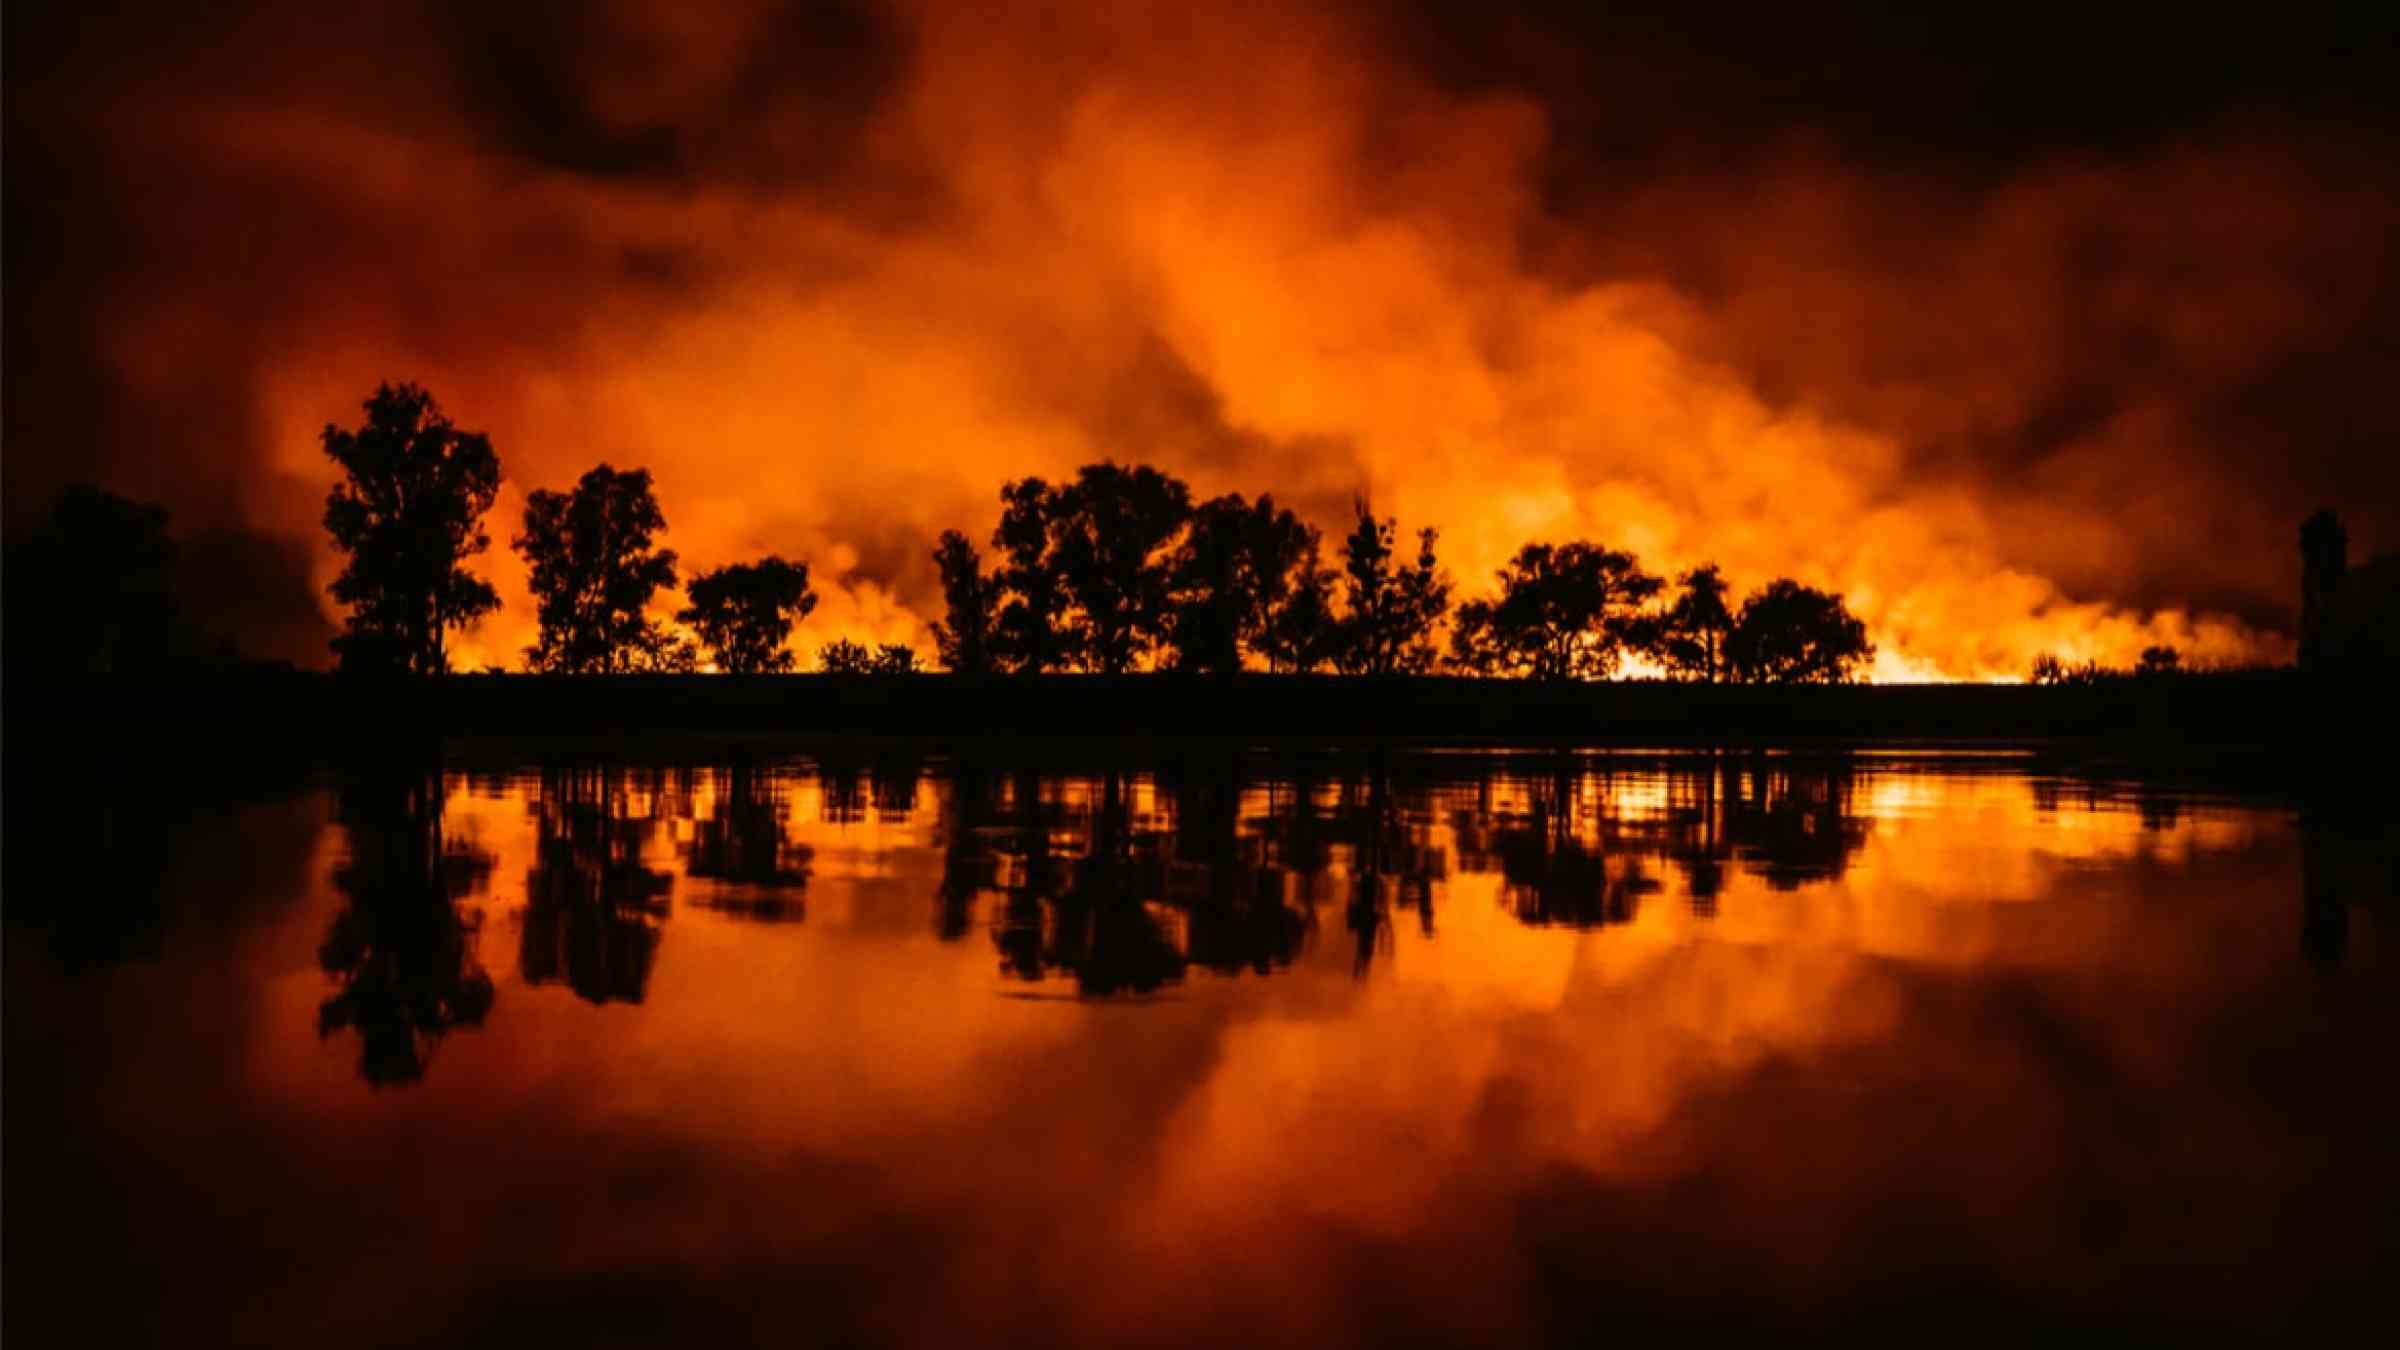 Wildfire during the night reflected in a water body